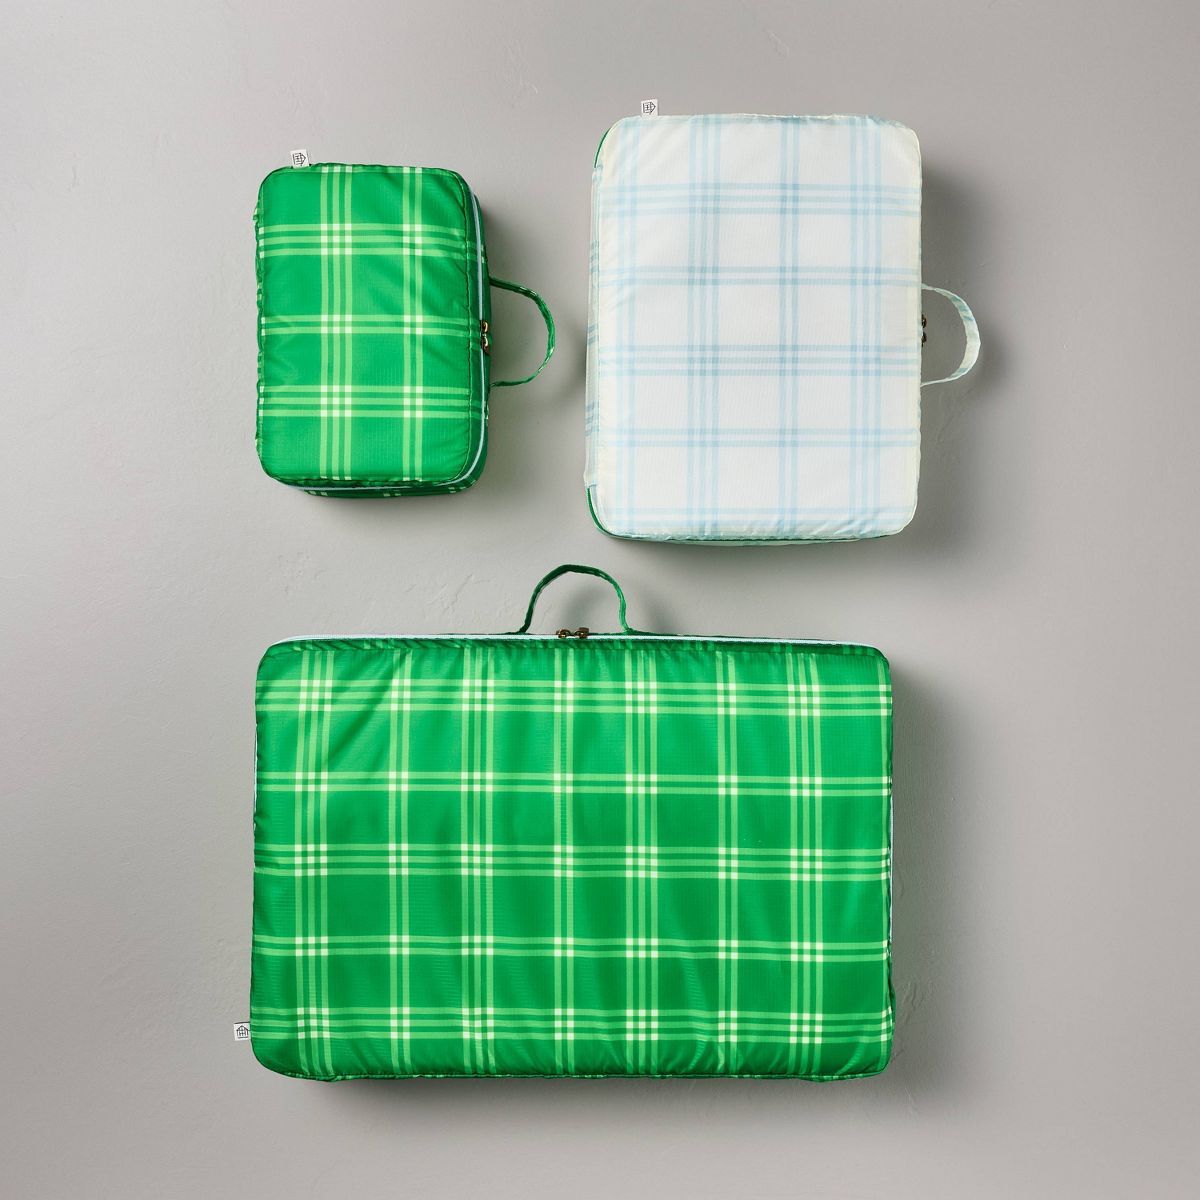 Tri-Stripe Plaid Packing Cubes Cream/Light Blue/Green (Set of 3) - Hearth & Hand™ with Magnolia | Target